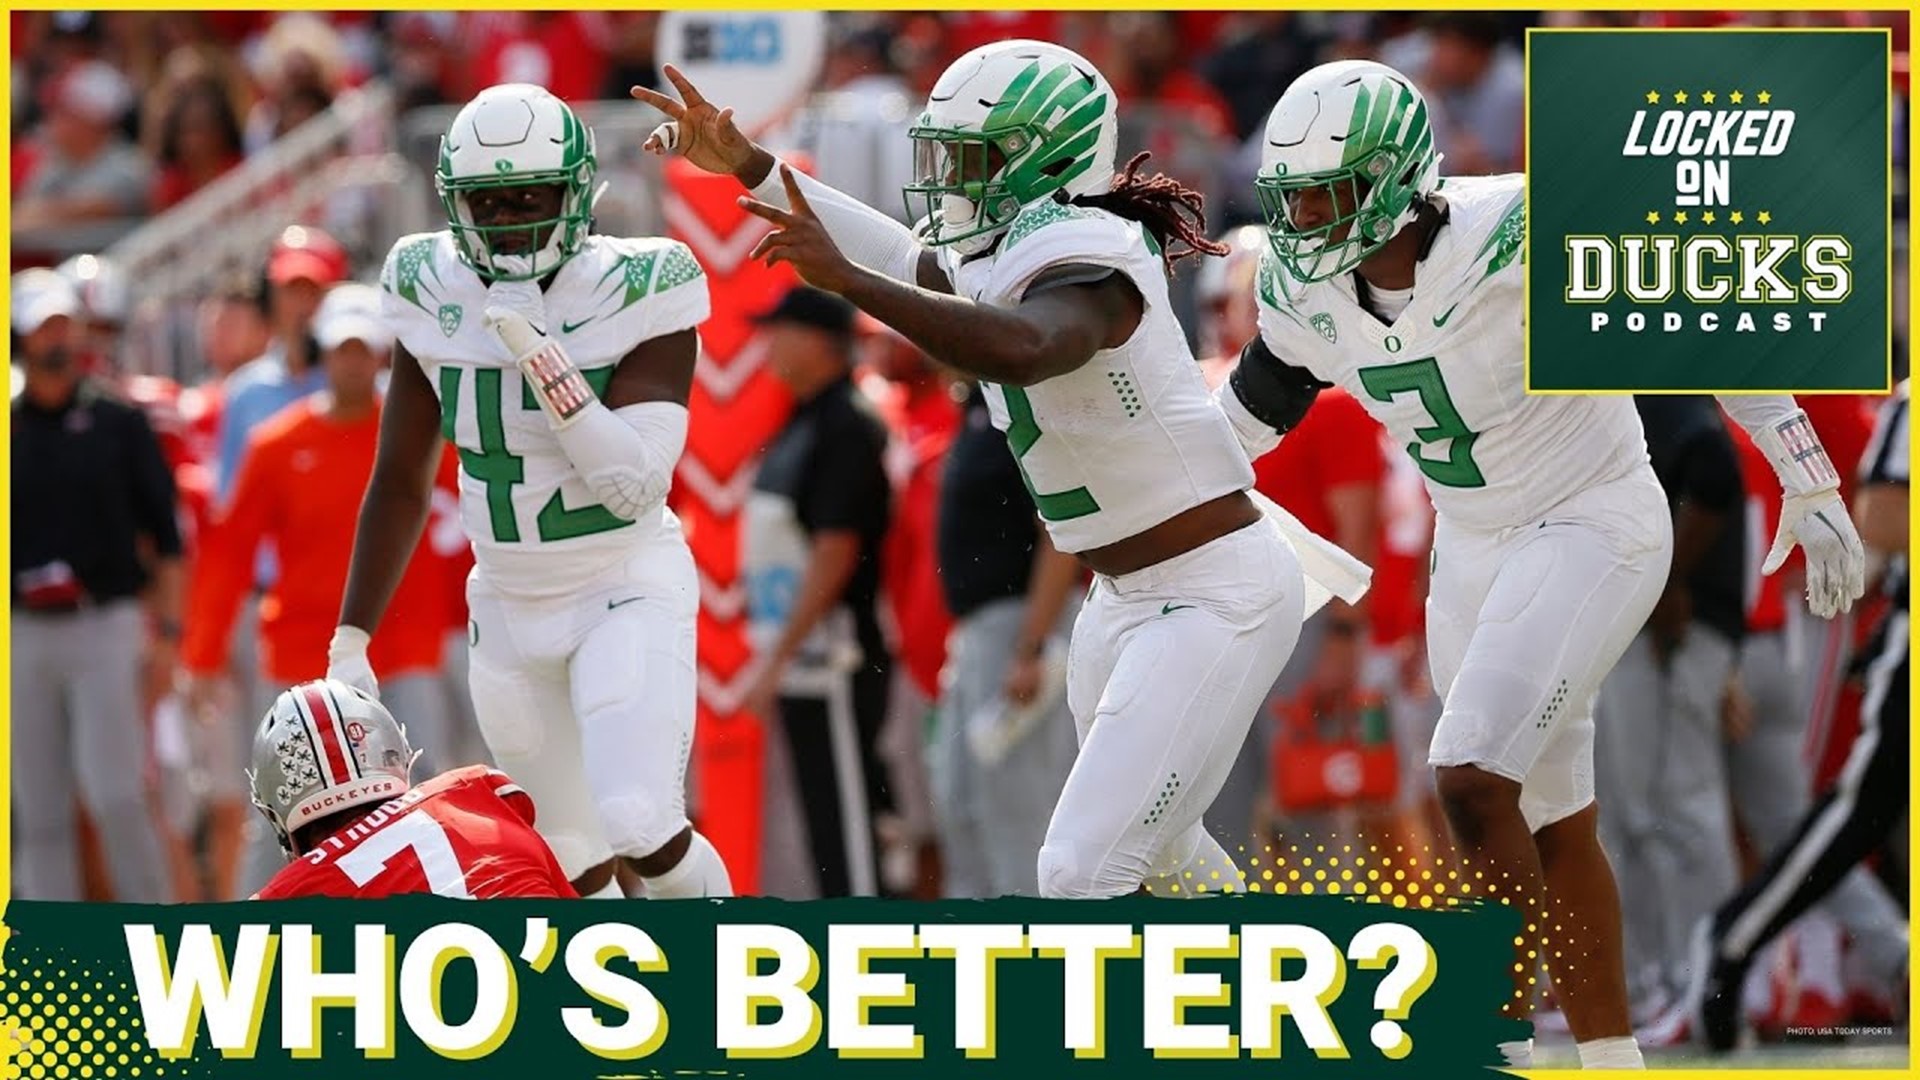 Oregon Football vs Ohio State Who has the better roster? 3 meetings in